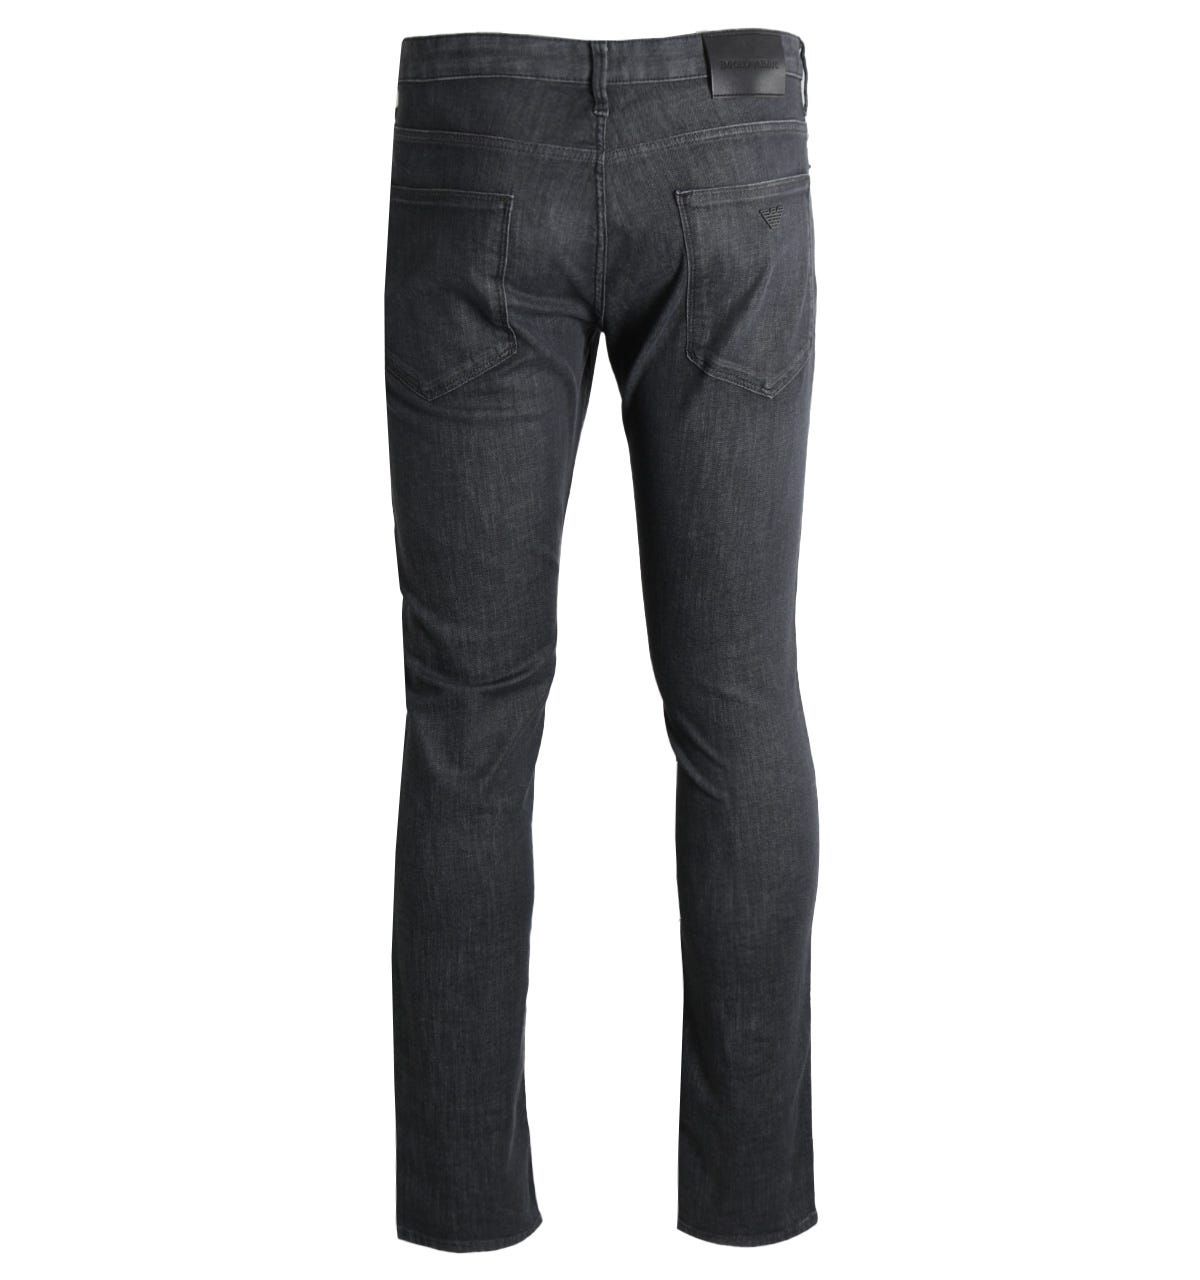 Crafted from premium cotton denim with added stretch in a slim fit, these jeans from Emporio Armani combine a classic five pocket design with updated elements to bring you optimum comfort and style. Rivets have been used at each pocket to reinforce the stitching and add that much-needed durability. Finished with two Emporio Armani logos at the coin pocket and the rear.Slim Fit , Stretch Cotton Denim, Five Pocket Design, Tonal Stitching, Button & Zip Fly Fastening, Emporio Armani Branding. Style & Fit Slim Fit, Fits True to Size. Composition & Care 99% Cotton, 1% Elastane, Machine Wash.